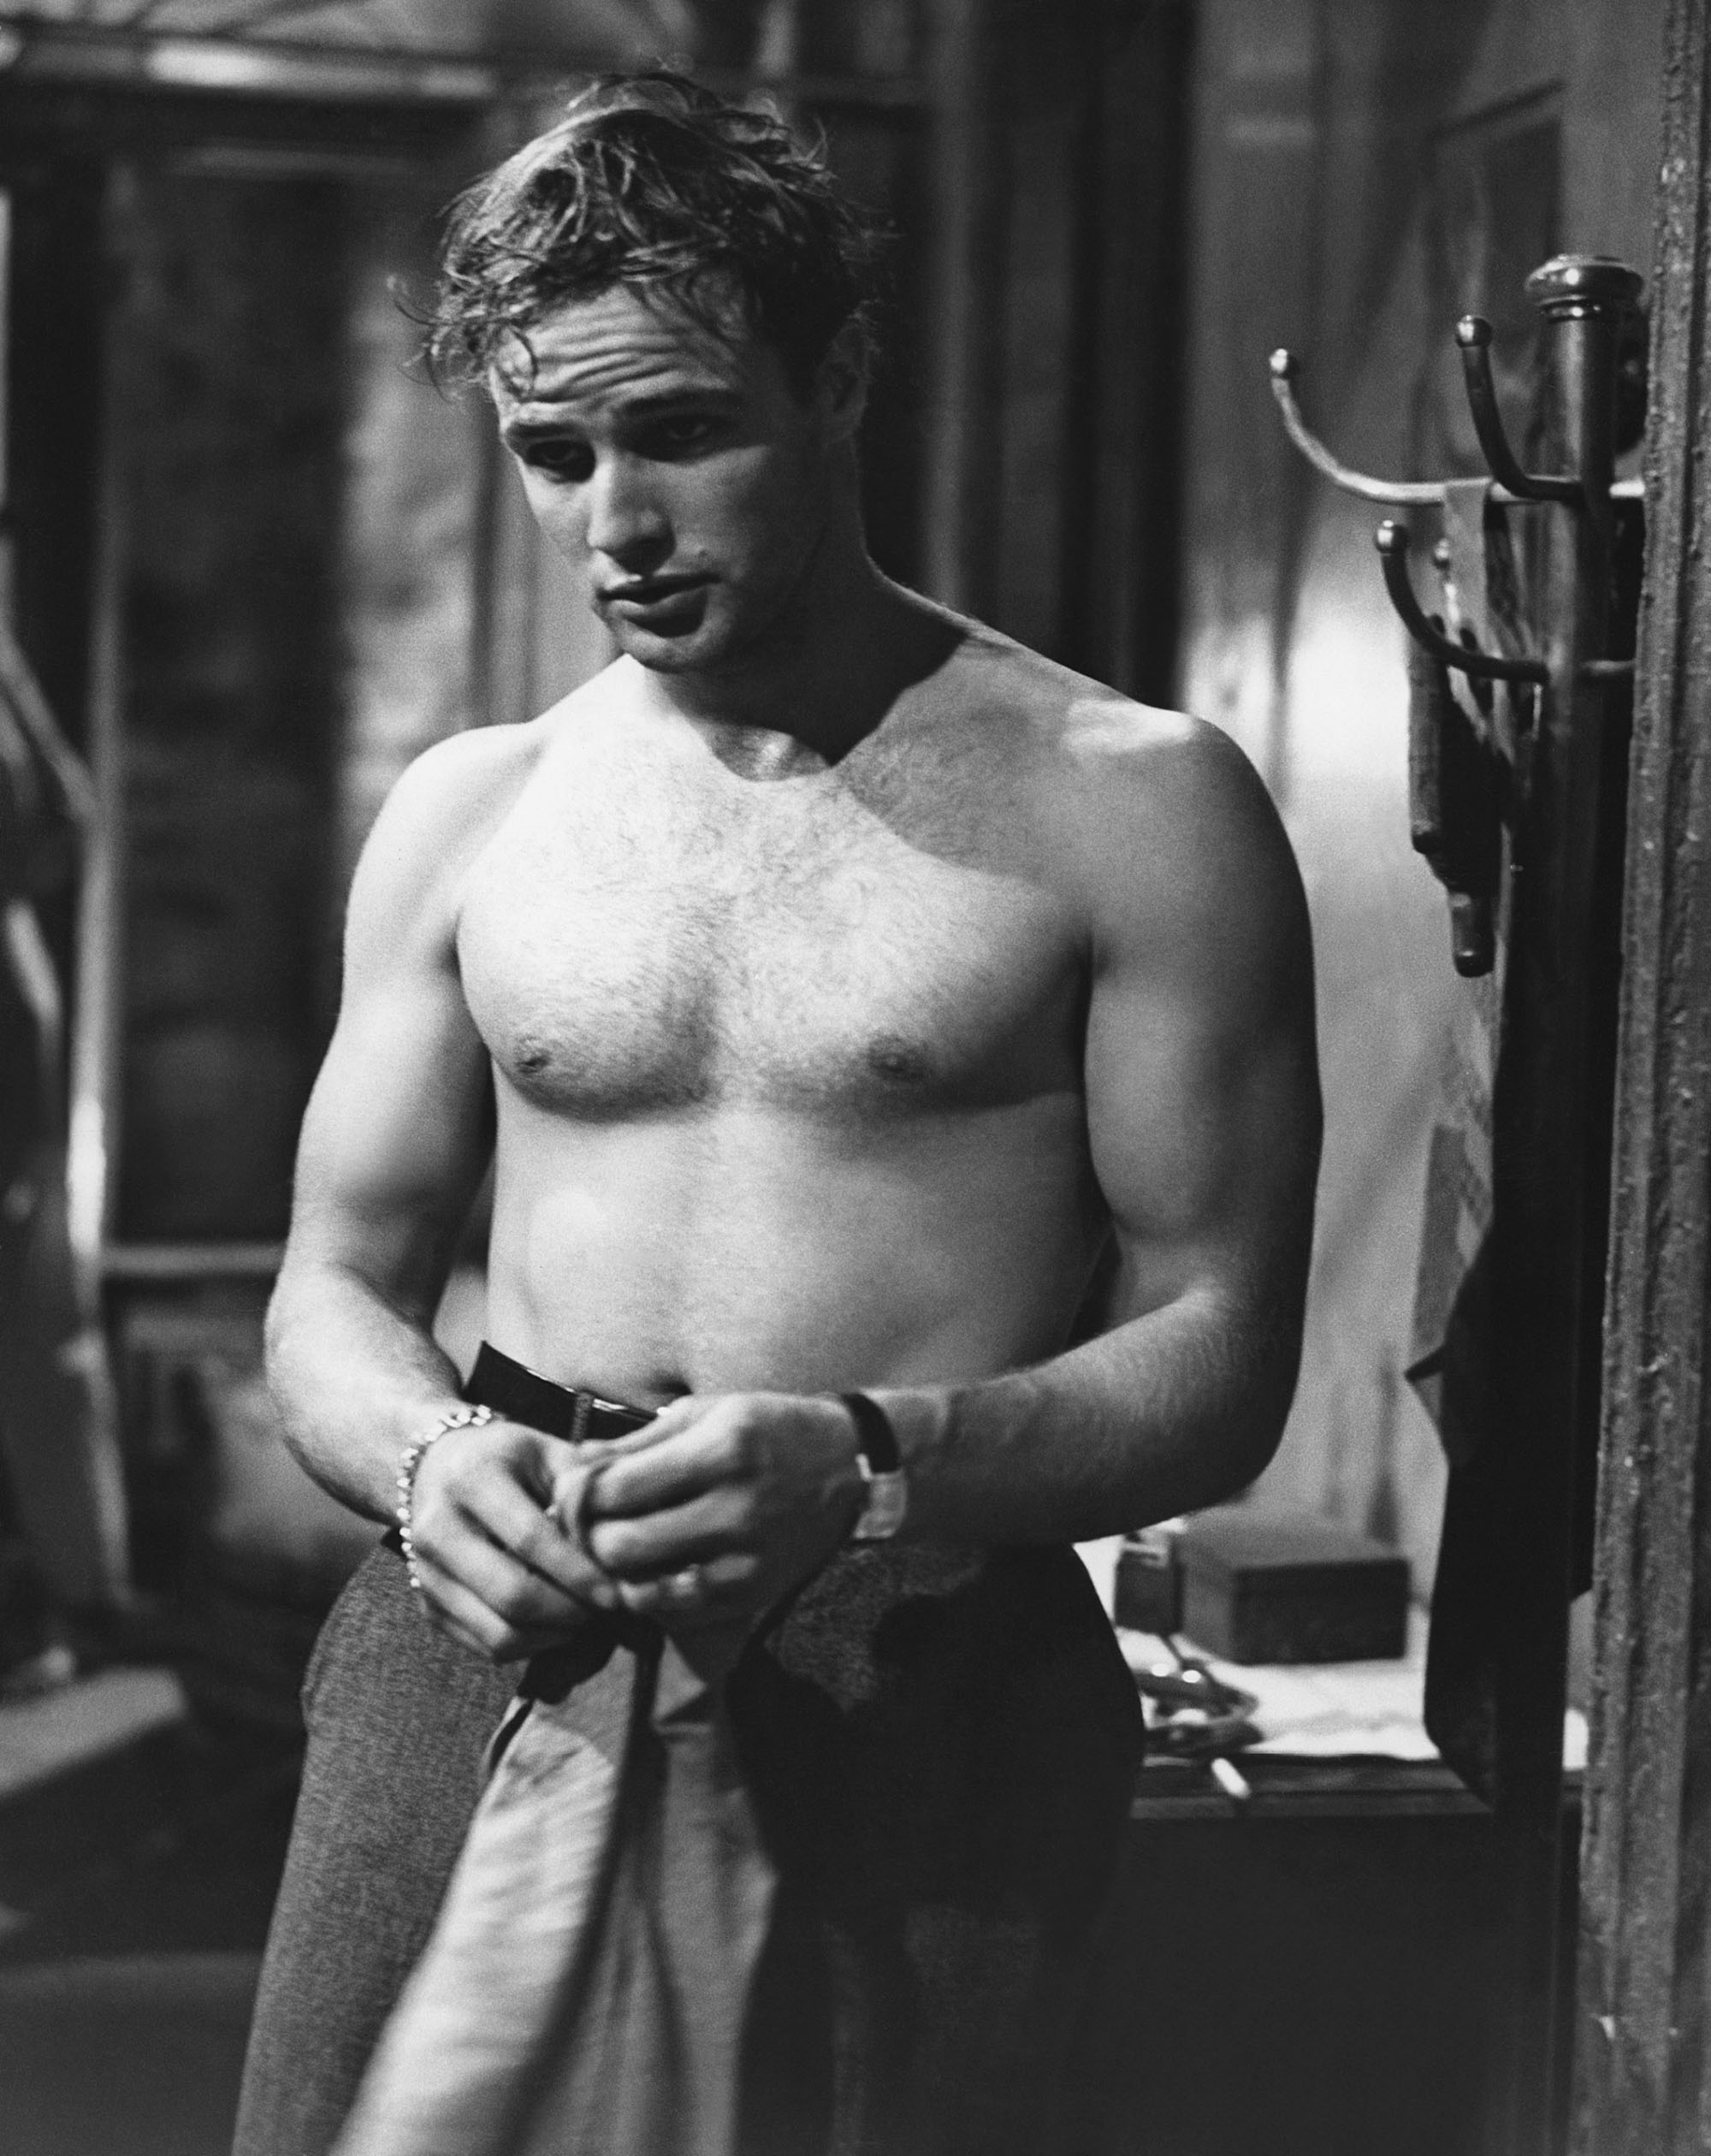 black and white image from the 1951 movie "A Streetcar Named Desire." Shown is Marlon Brando as Stanley Kowalski, standing and shirtless, in the vertical photo.